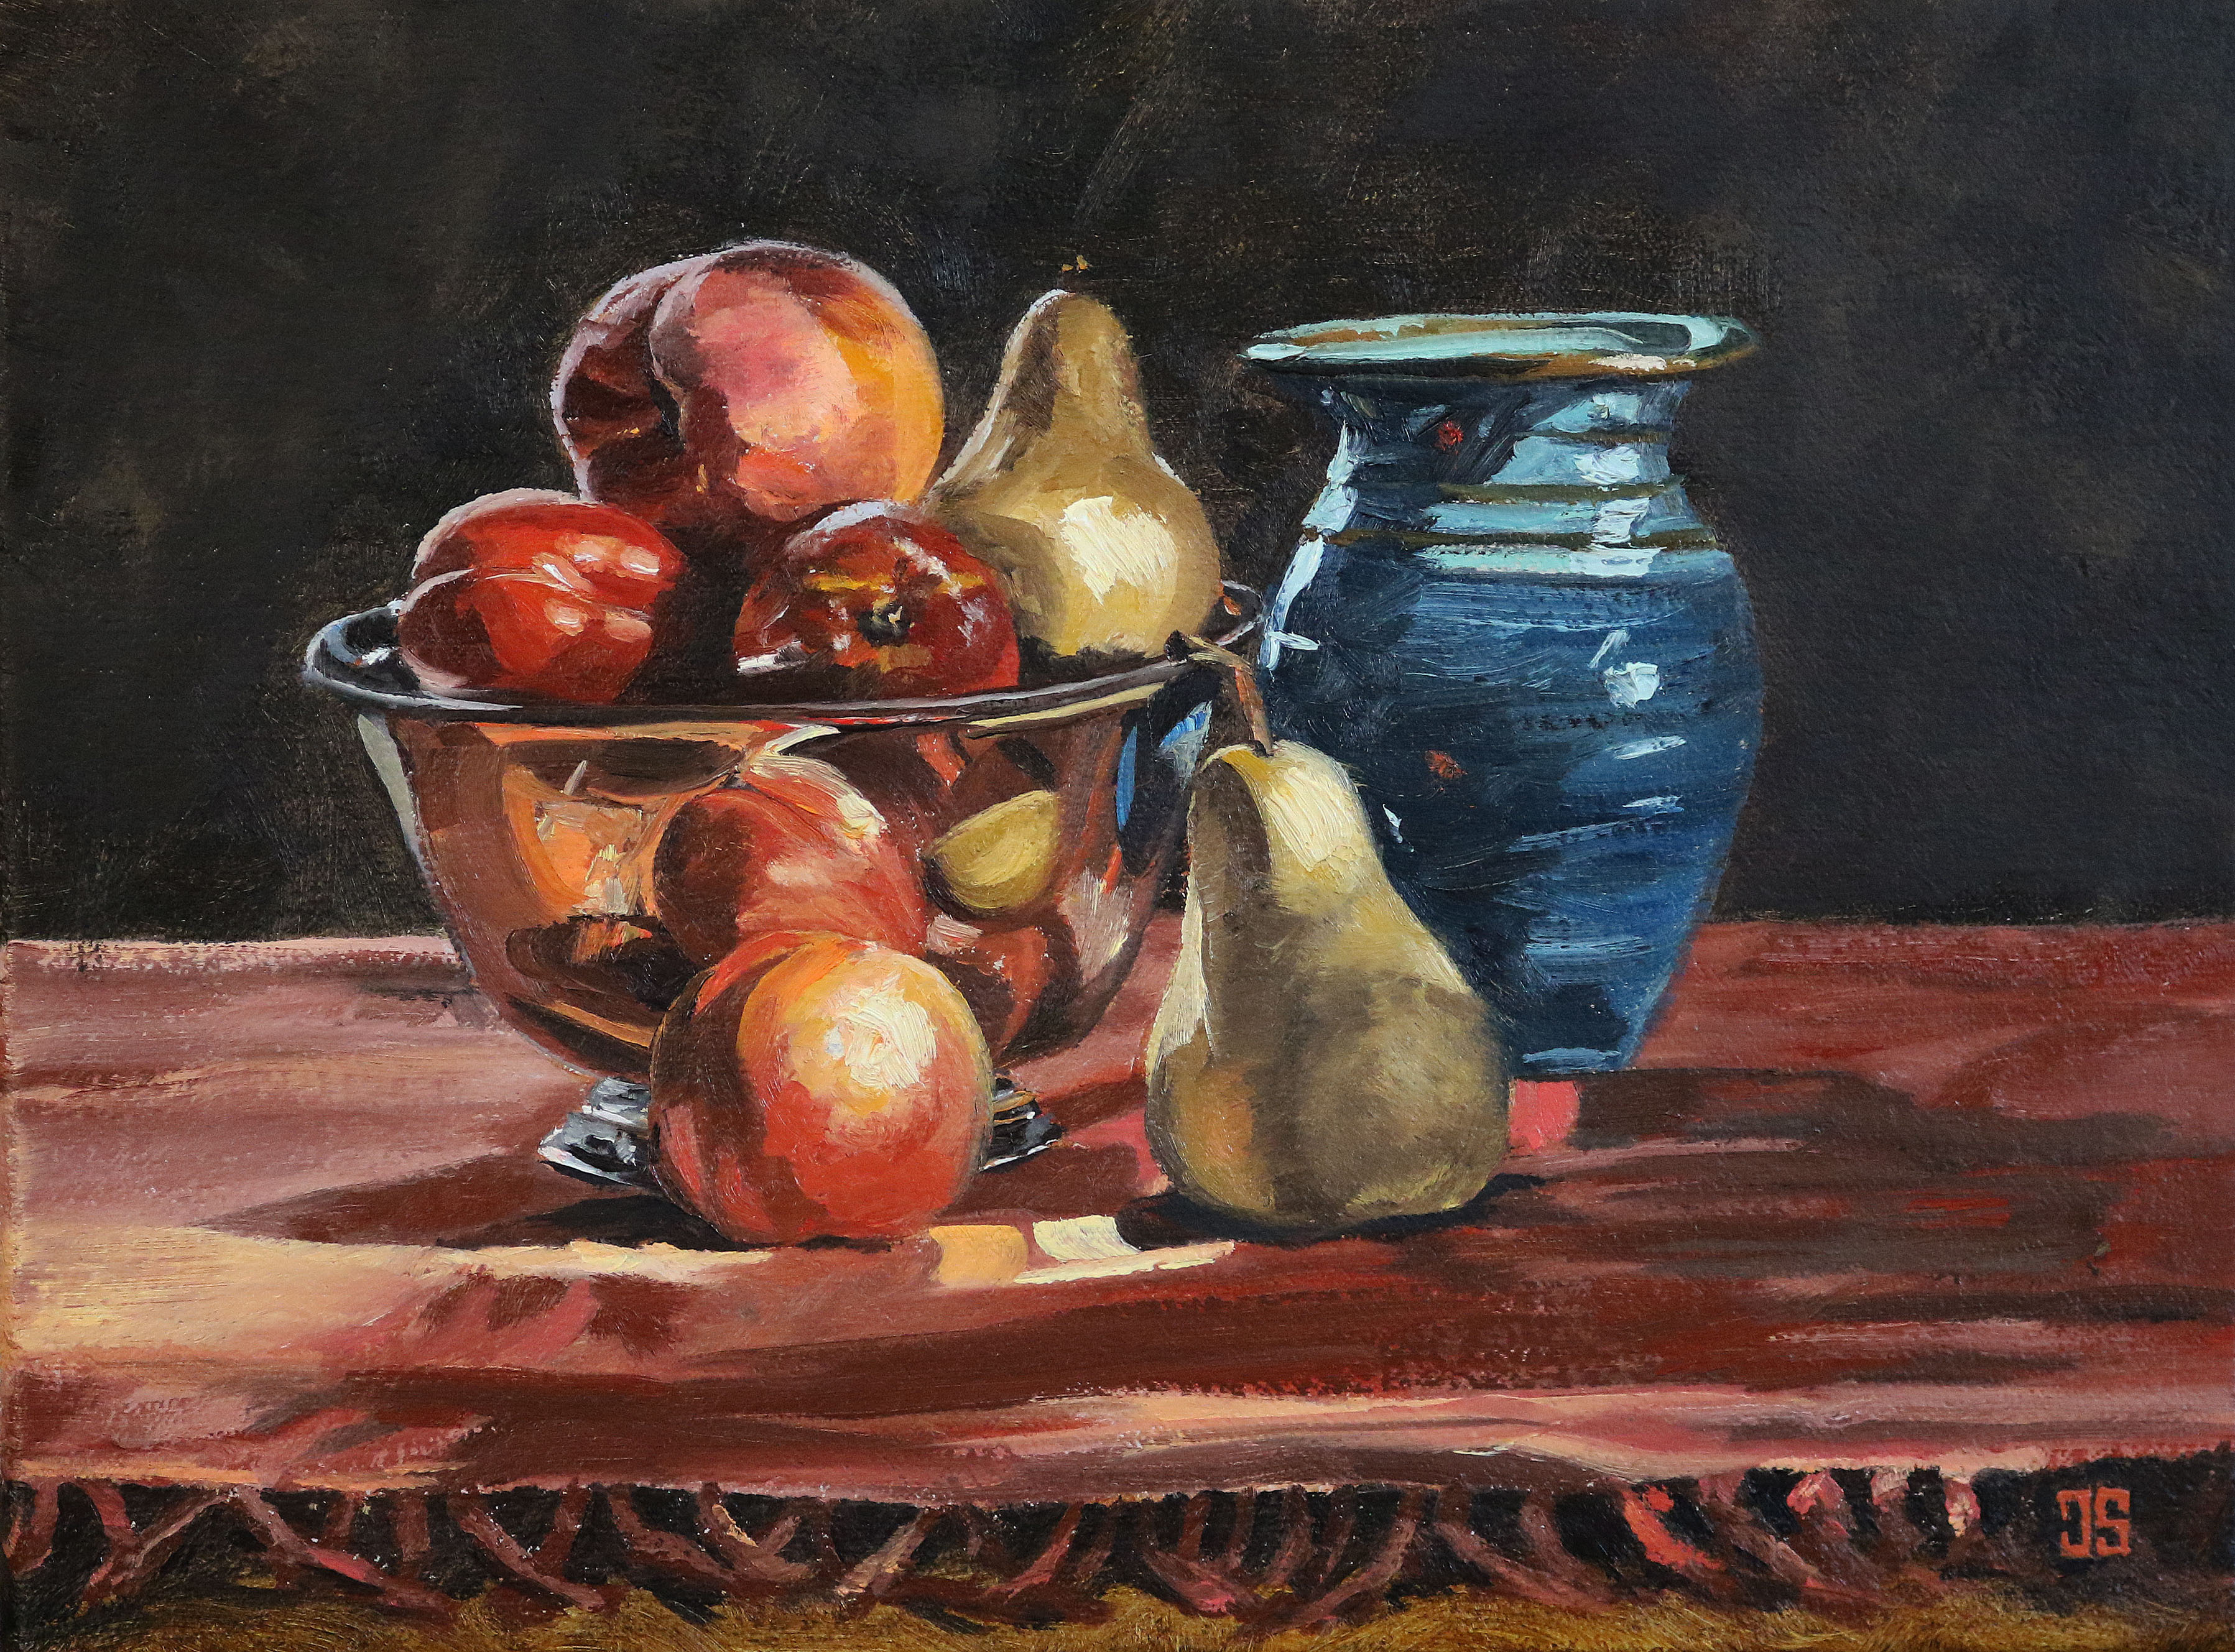 Peach, Pears, Nectarines by Jeffrey Dale Starr